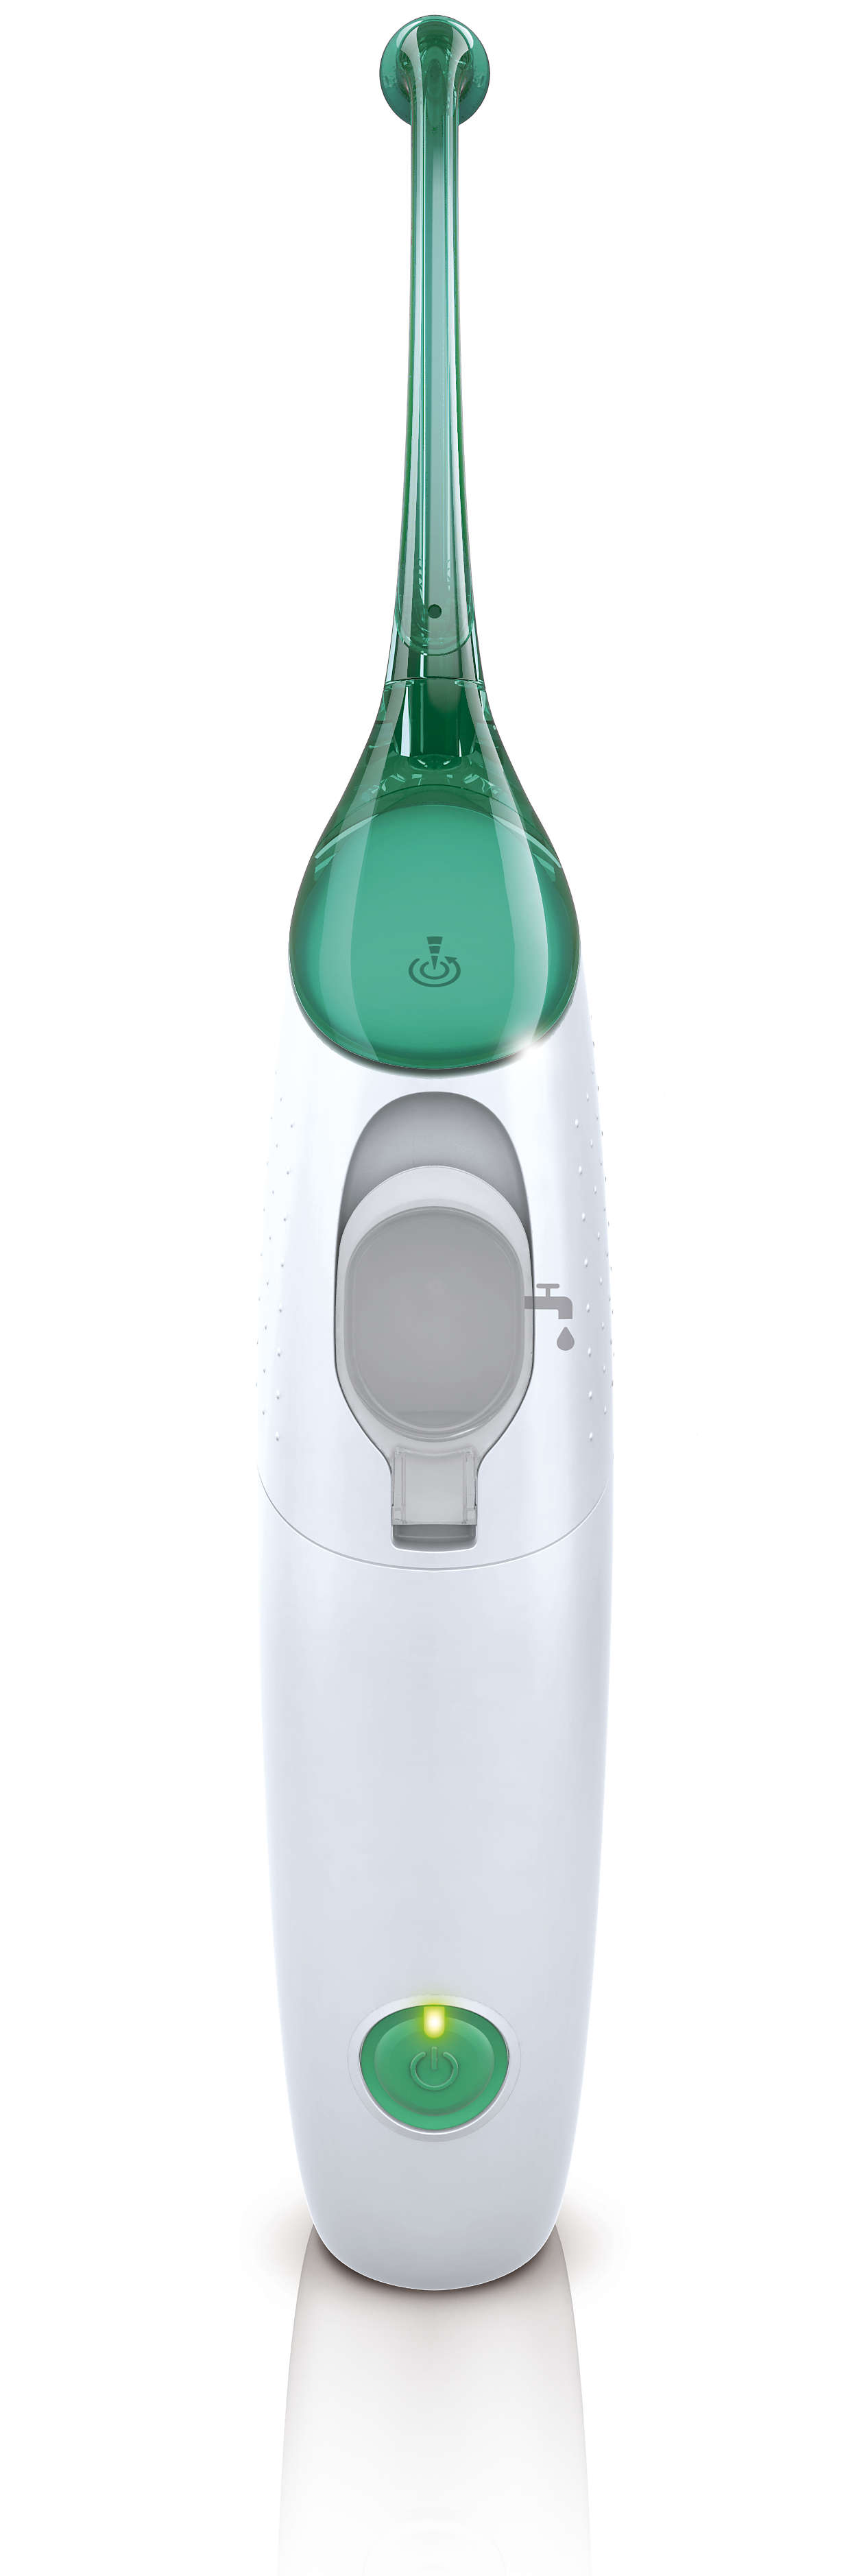 AirFloss Interdental Rechargeable HX8211/03 Sonicare